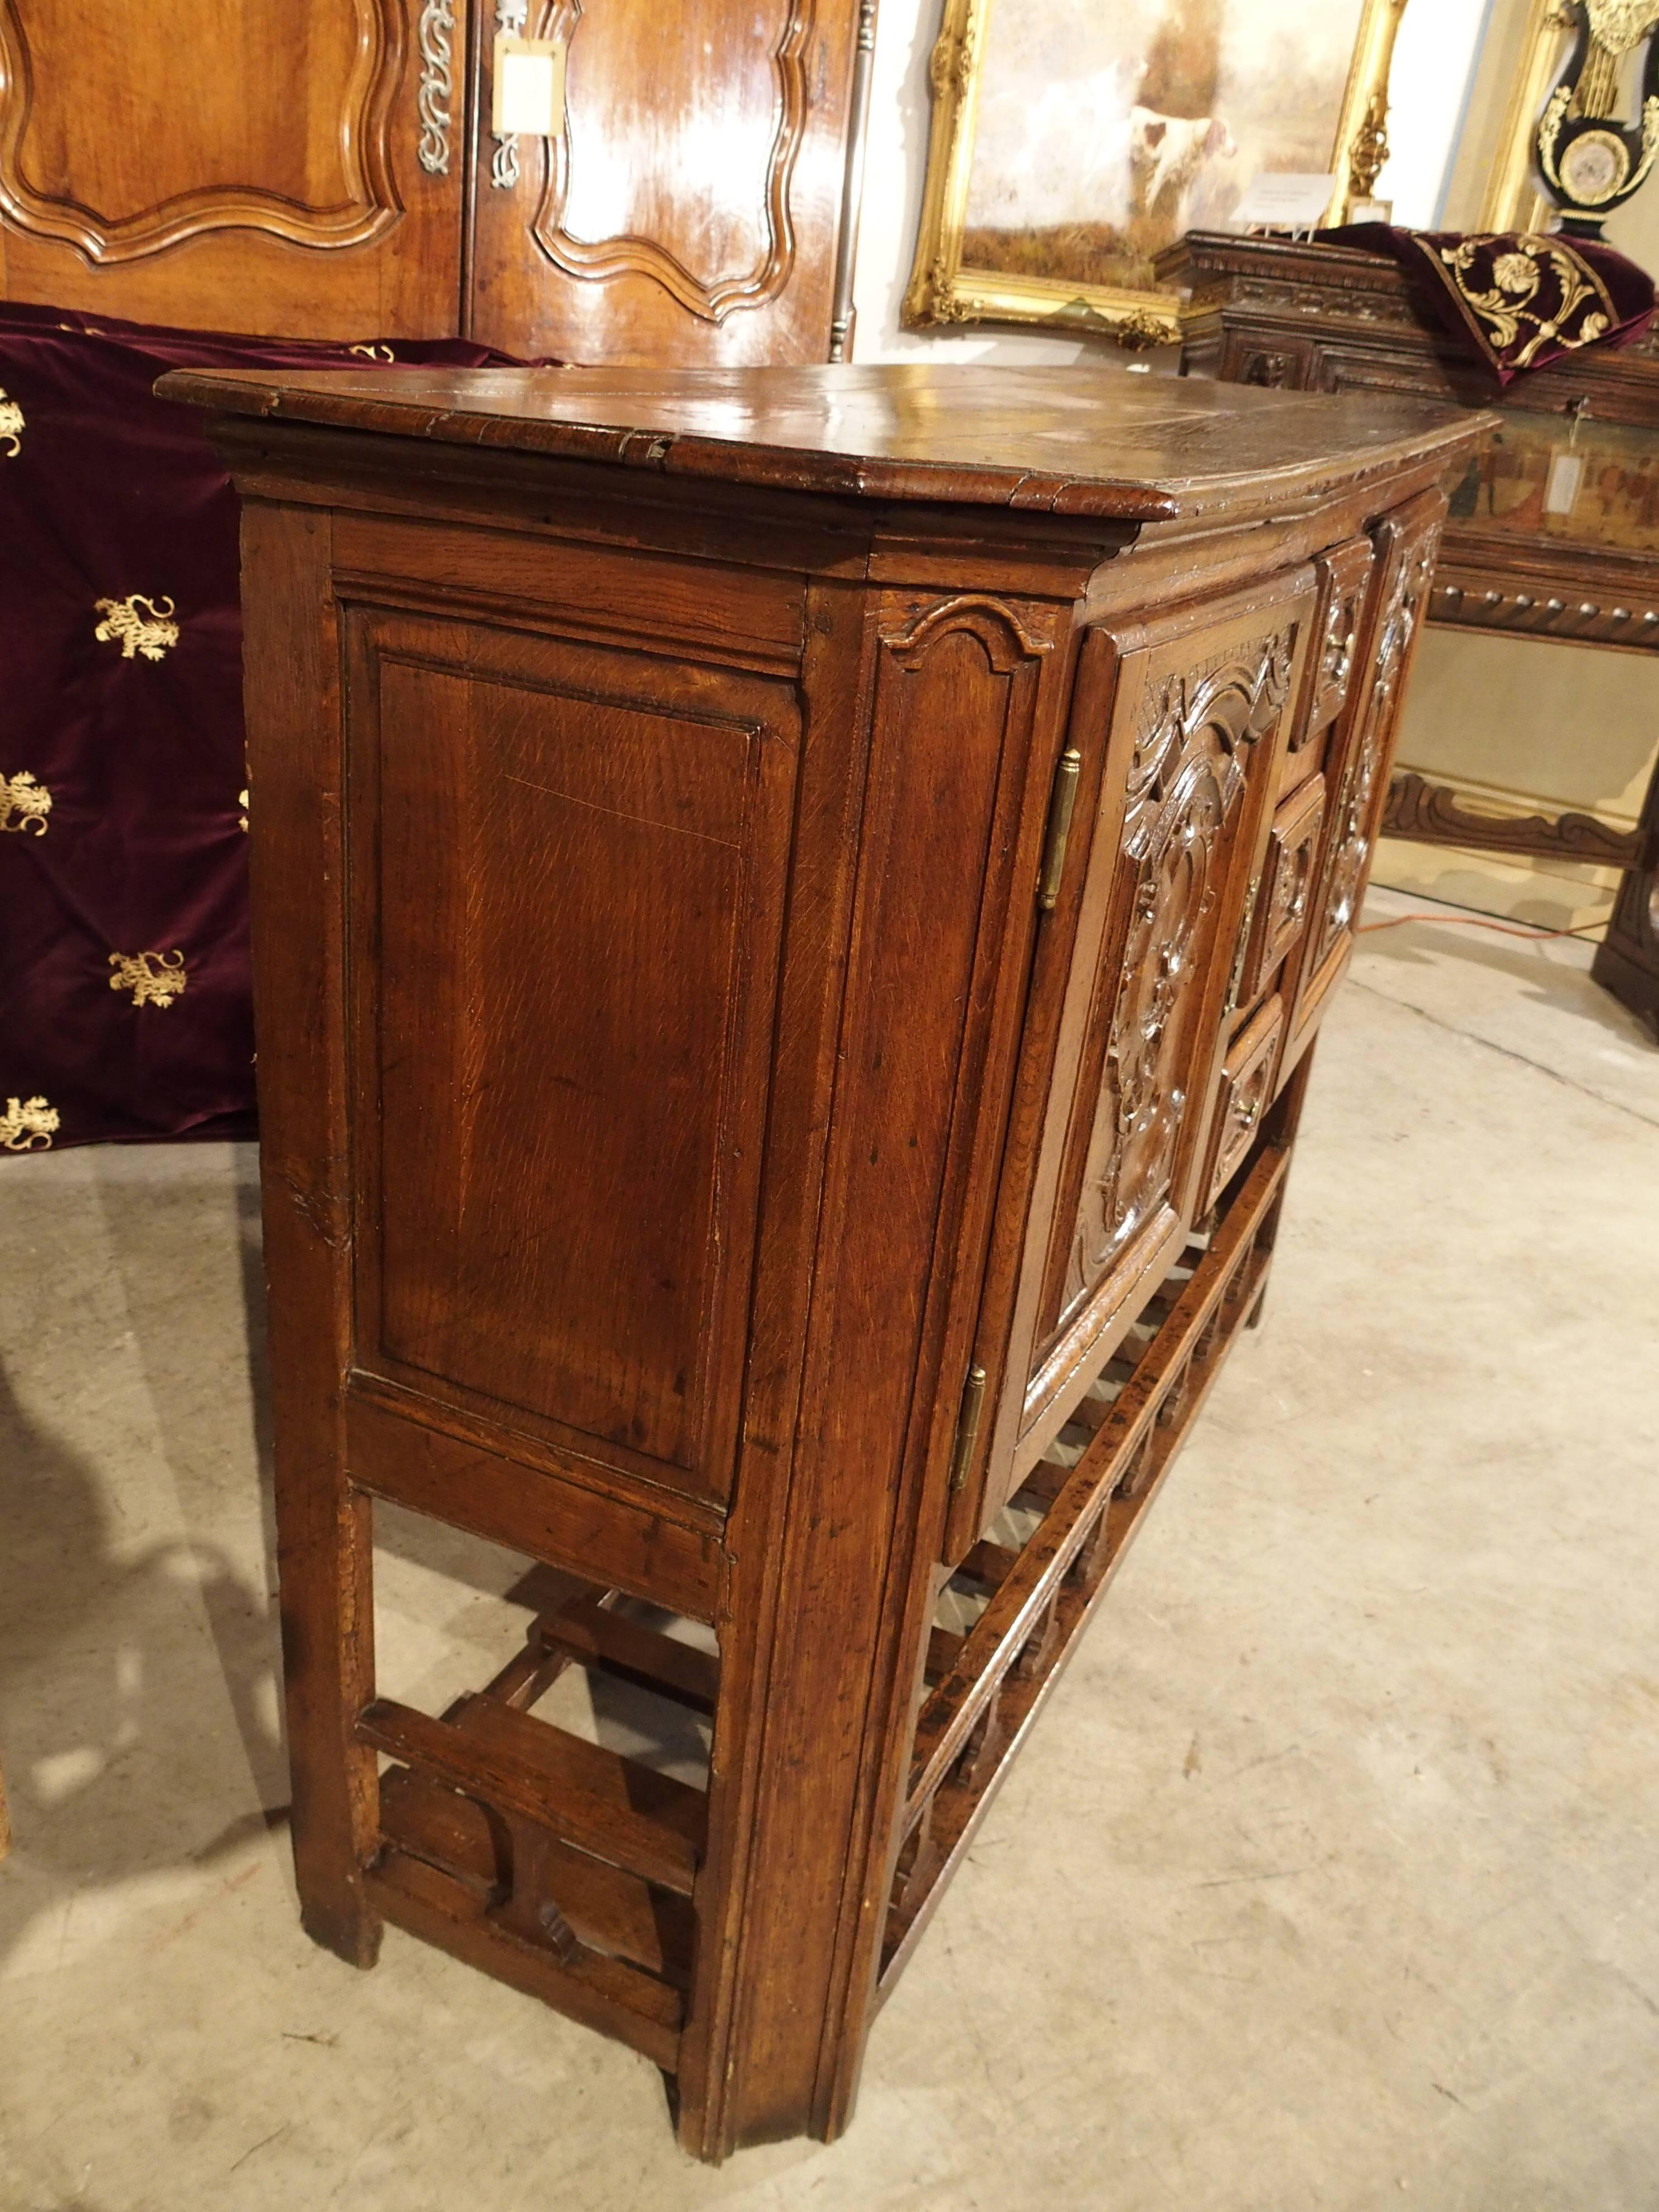 This Louis XV Style buffet was built in the early 19th century. We are considering it Louis XV style because of the beautiful scrolling rocaille motifs on the two front cabinet doors. However, it also has straight lined sides and a useful lower rack